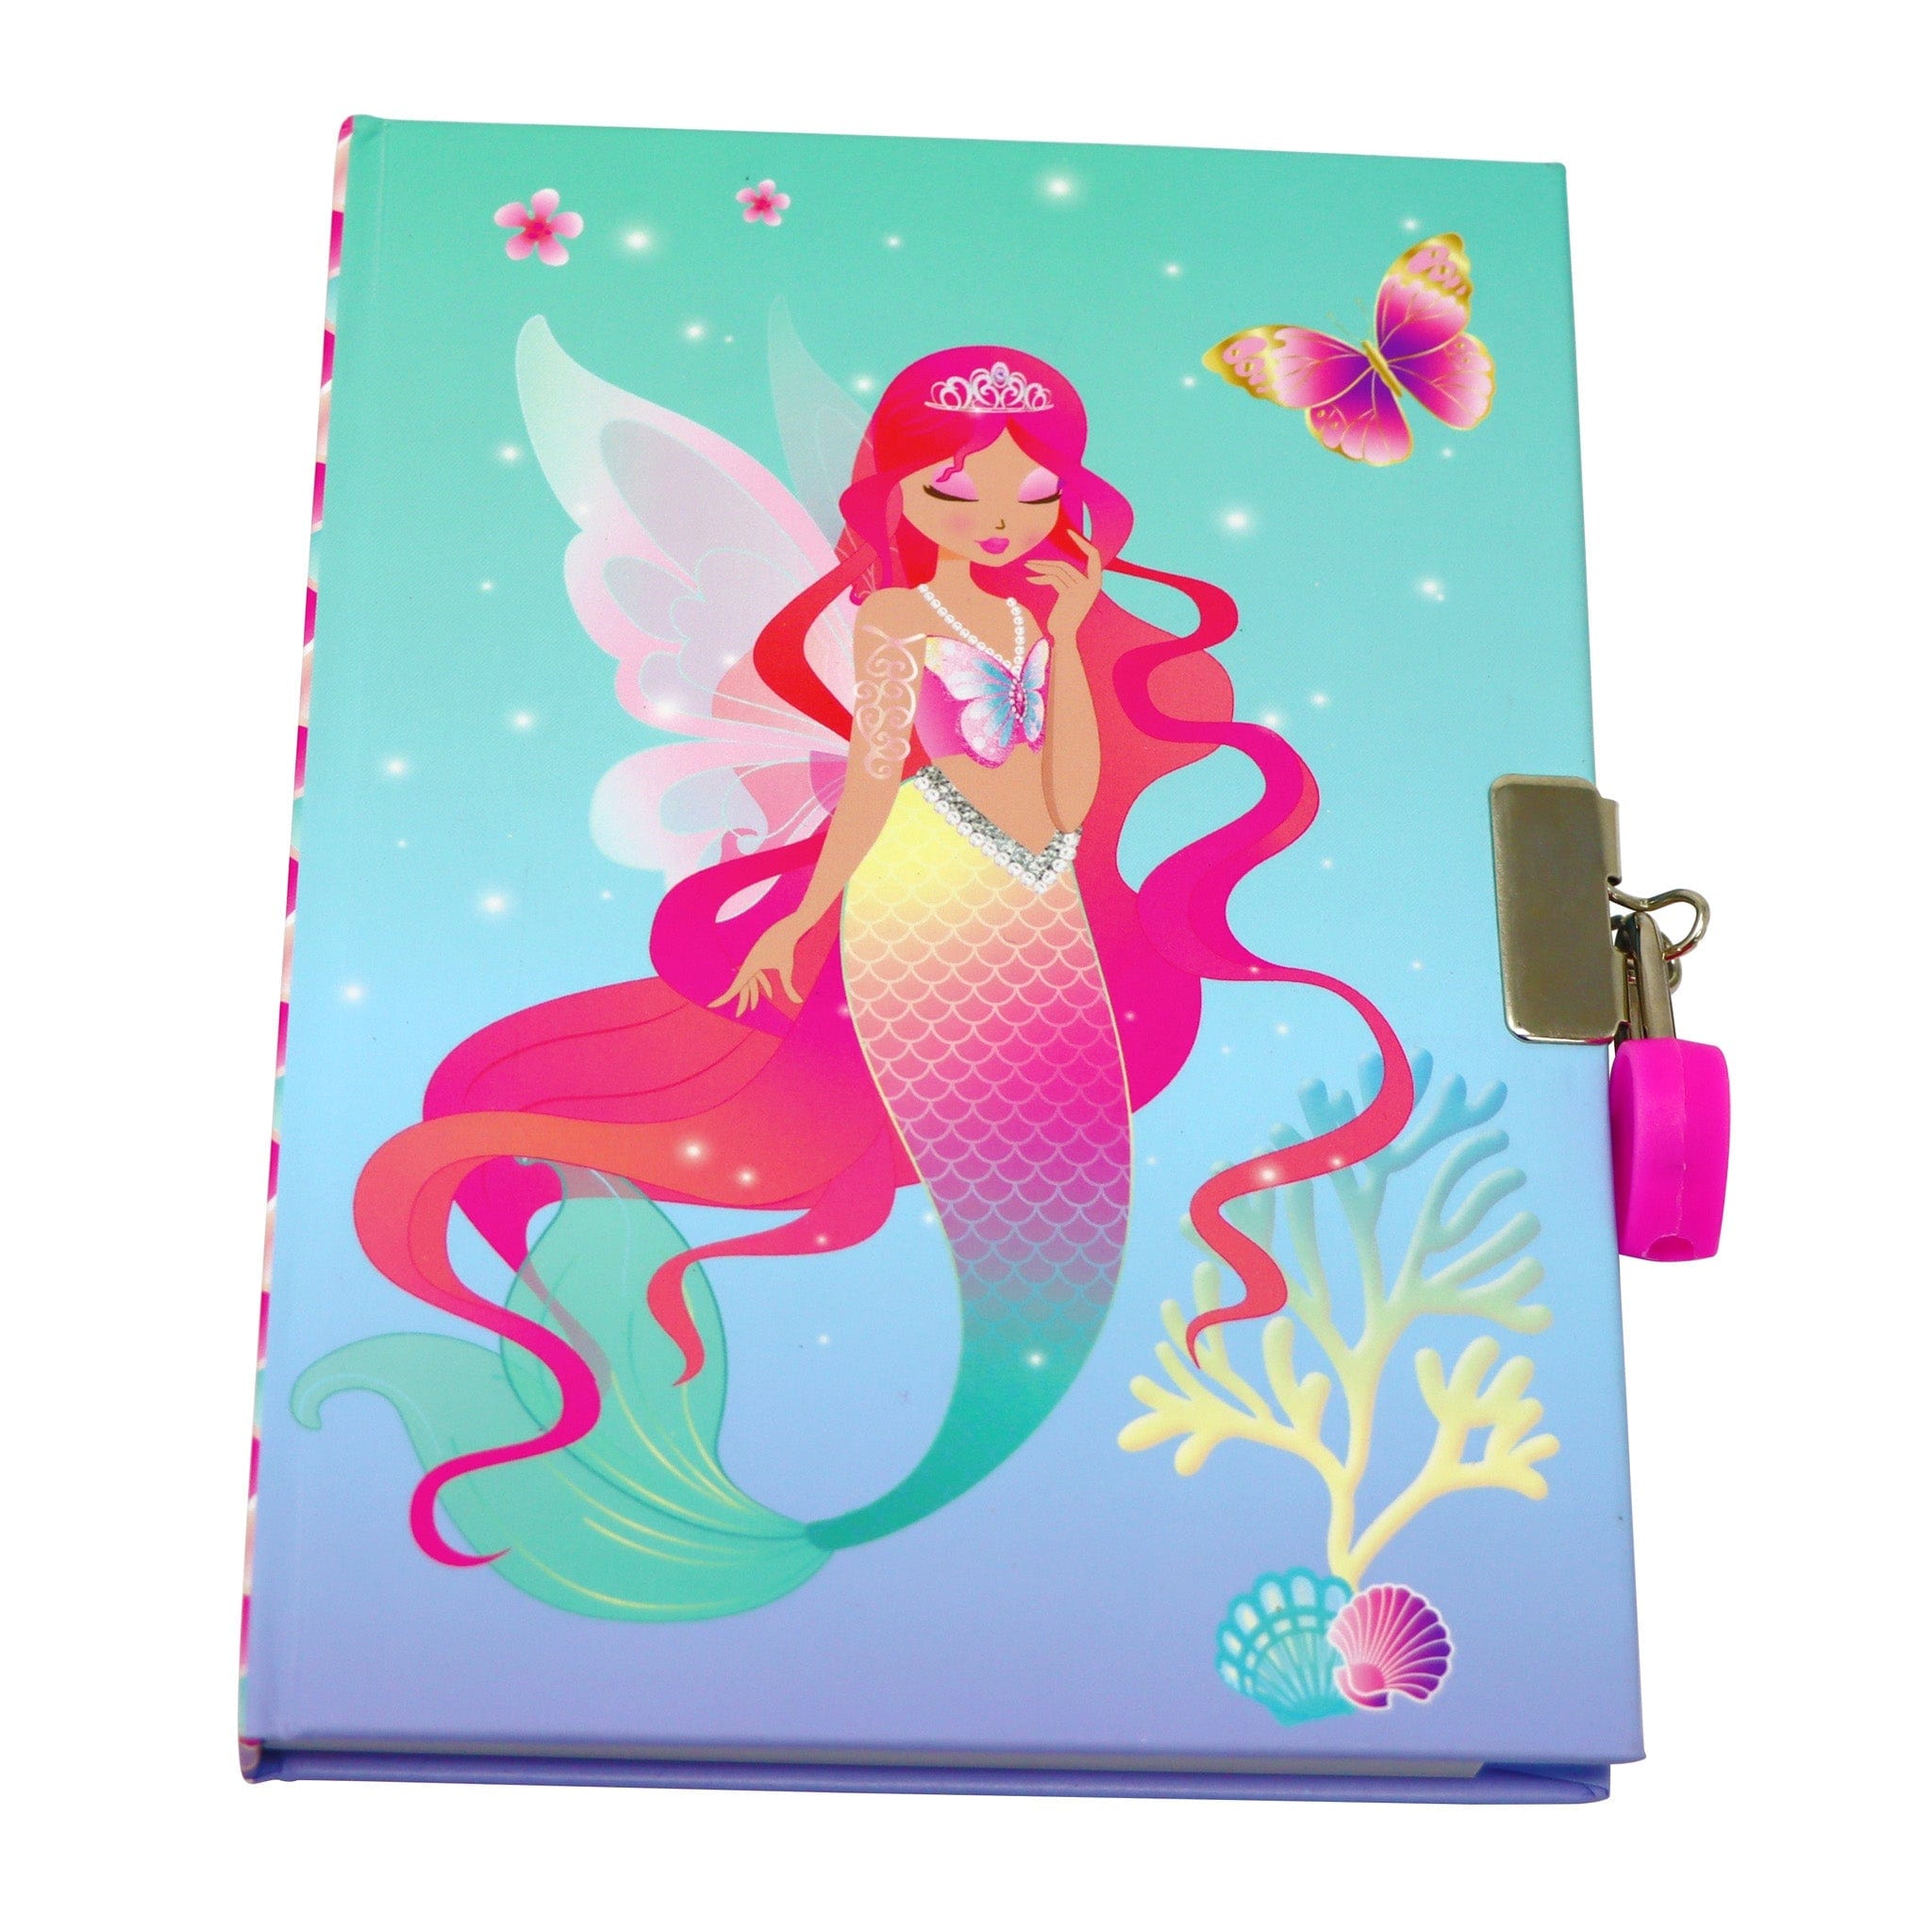 Pink Poppy Girls Accessory Shimmering Mermaid Strawberry Scented Lockable Diary